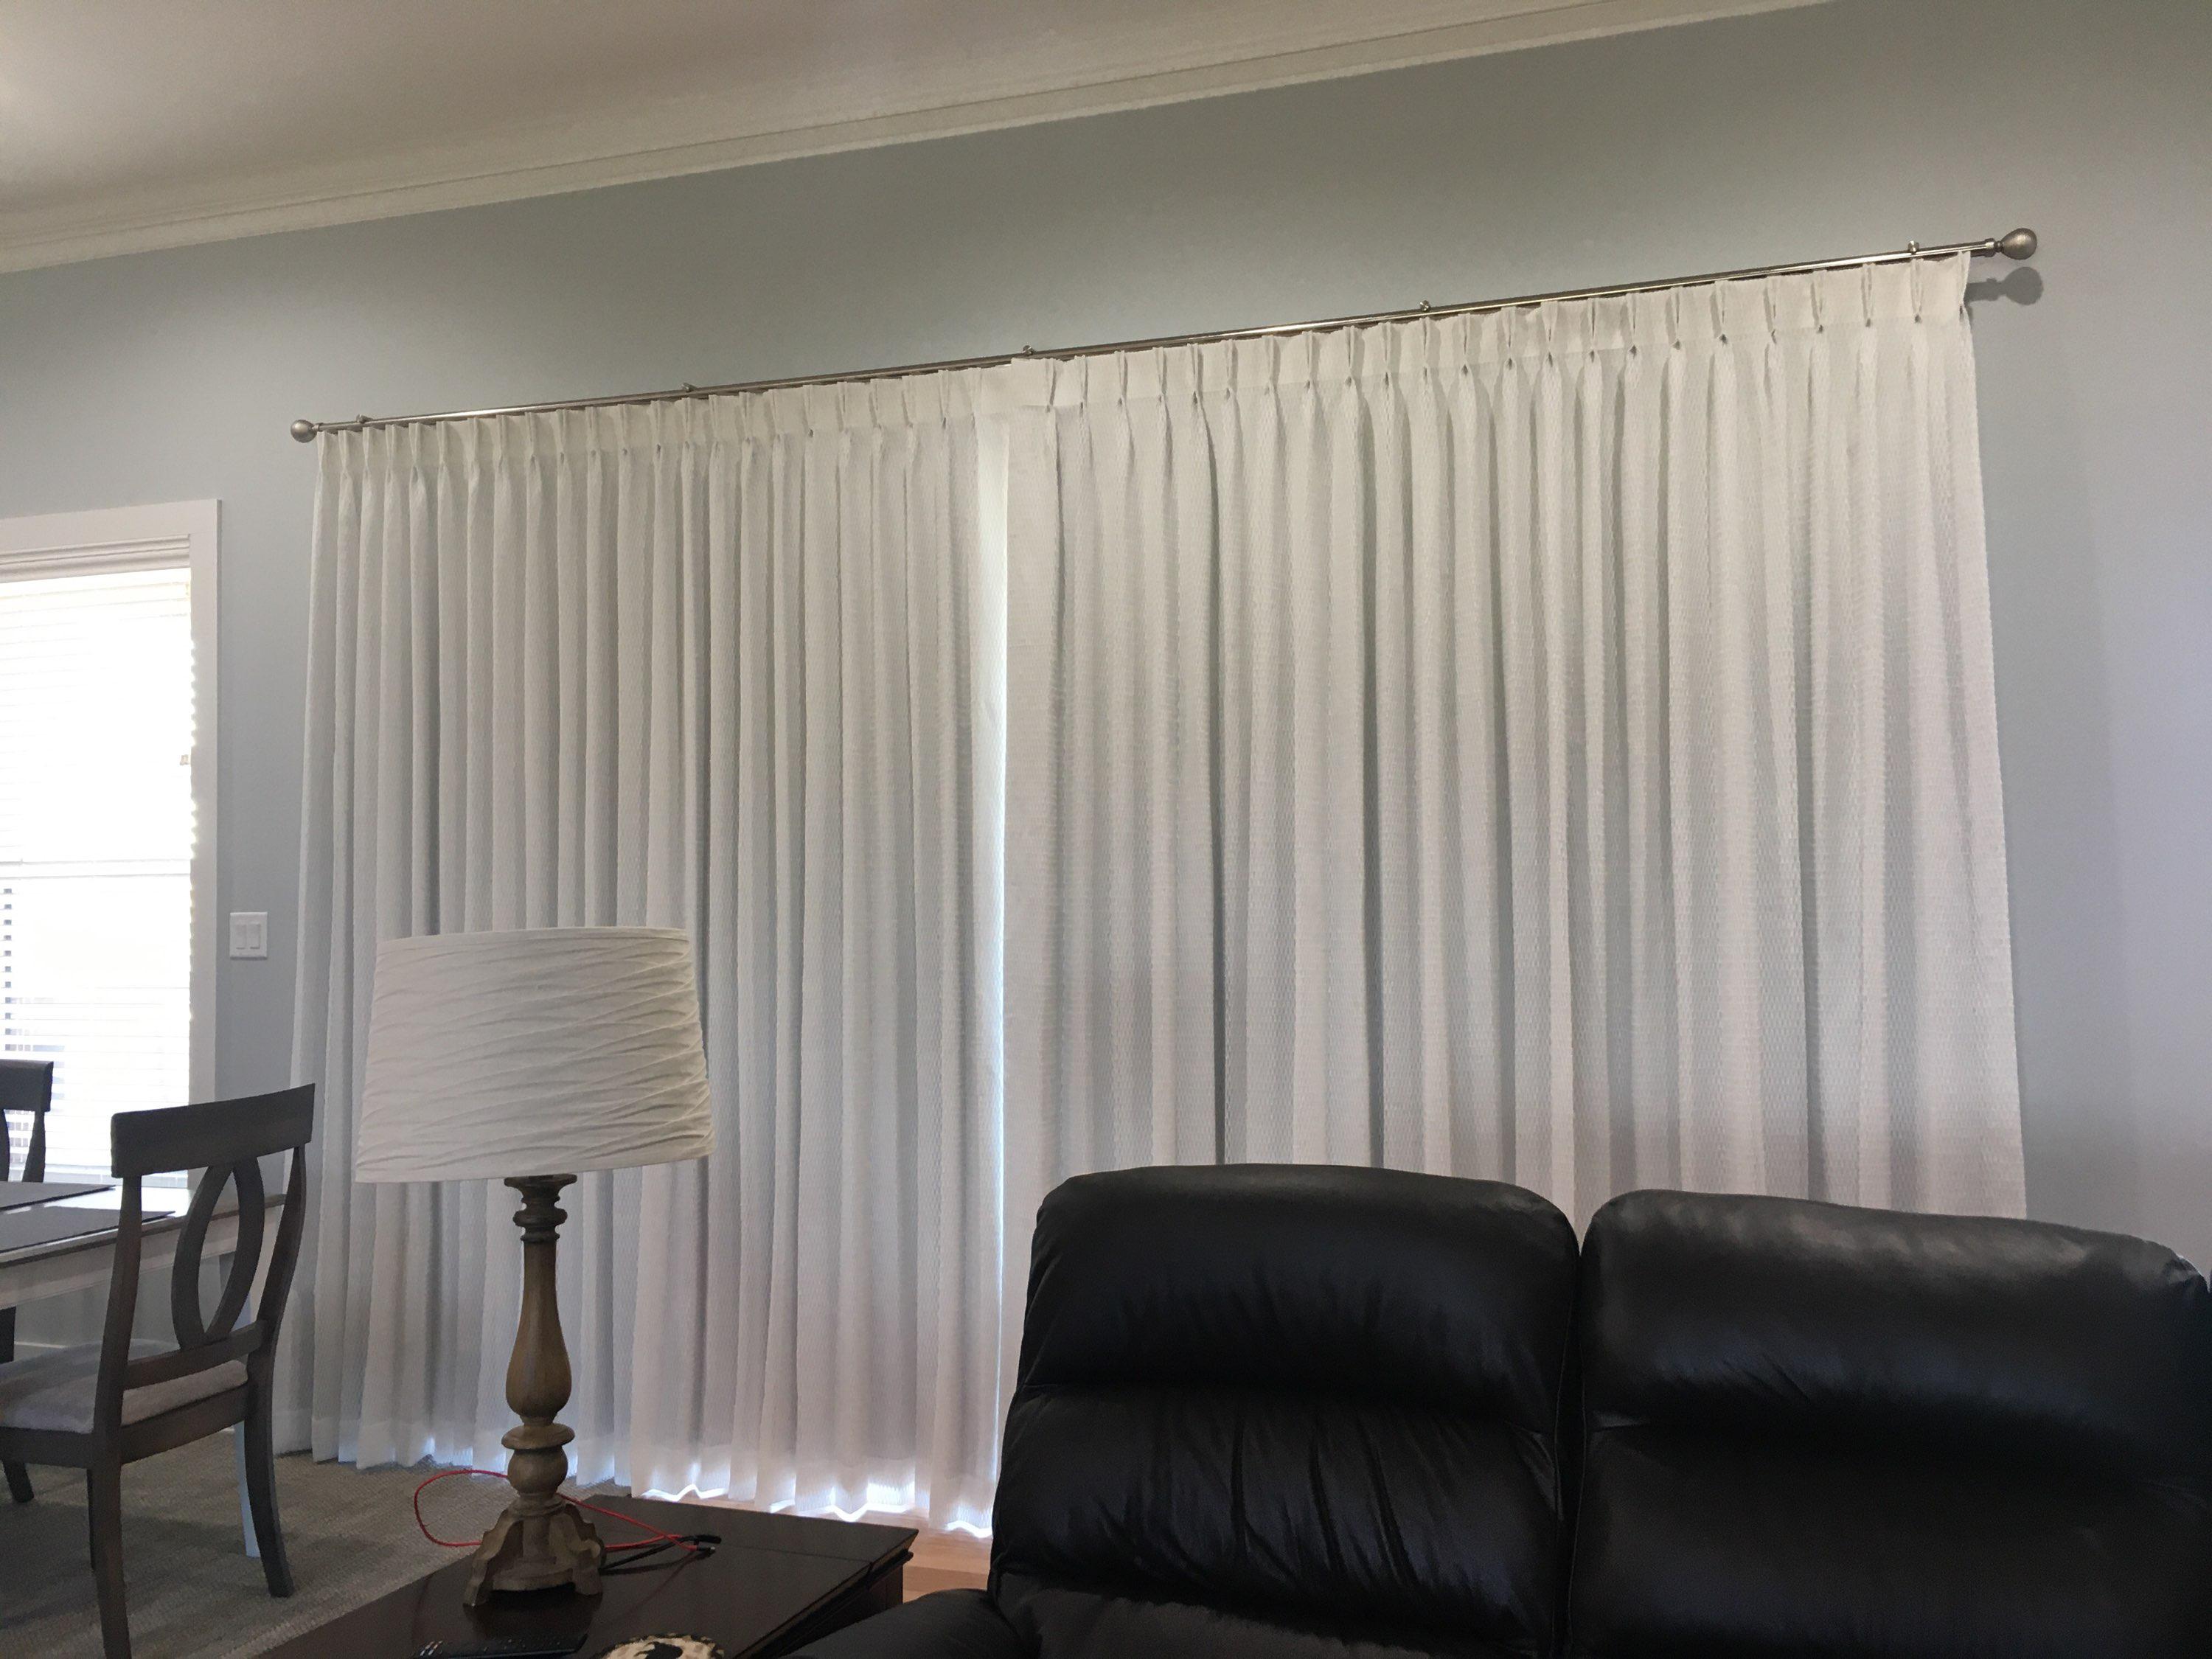 Our Blackout Draperies are a popular option since they provide total light blocking and offer a touc Budget Blinds of Knoxville & Maryville Knoxville (865)588-3377